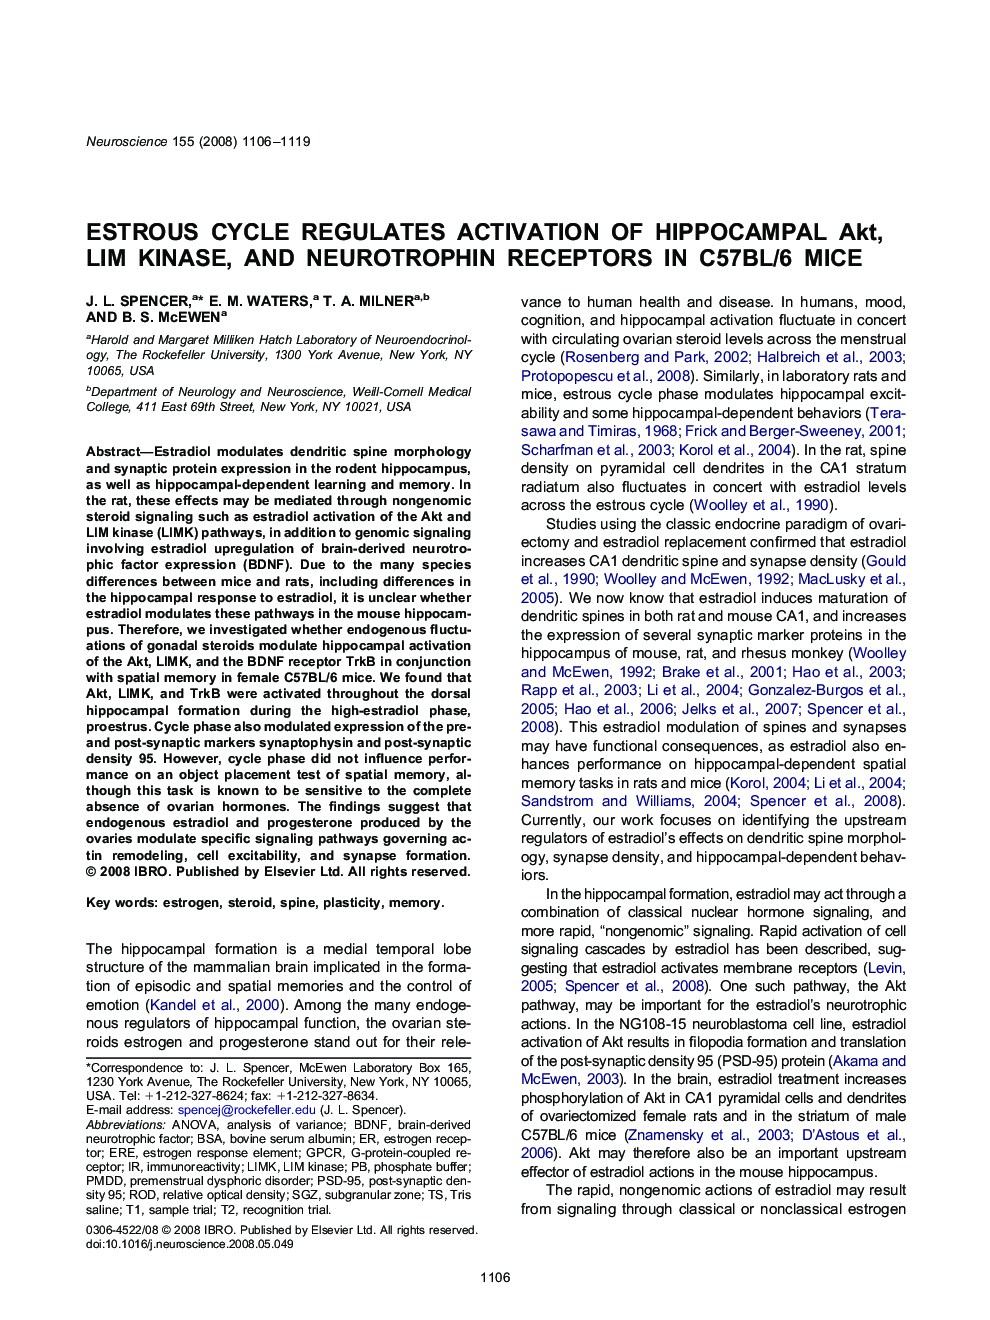 Estrous cycle regulates activation of hippocampal Akt, LIM kinase, and neurotrophin receptors in C57BL/6 mice